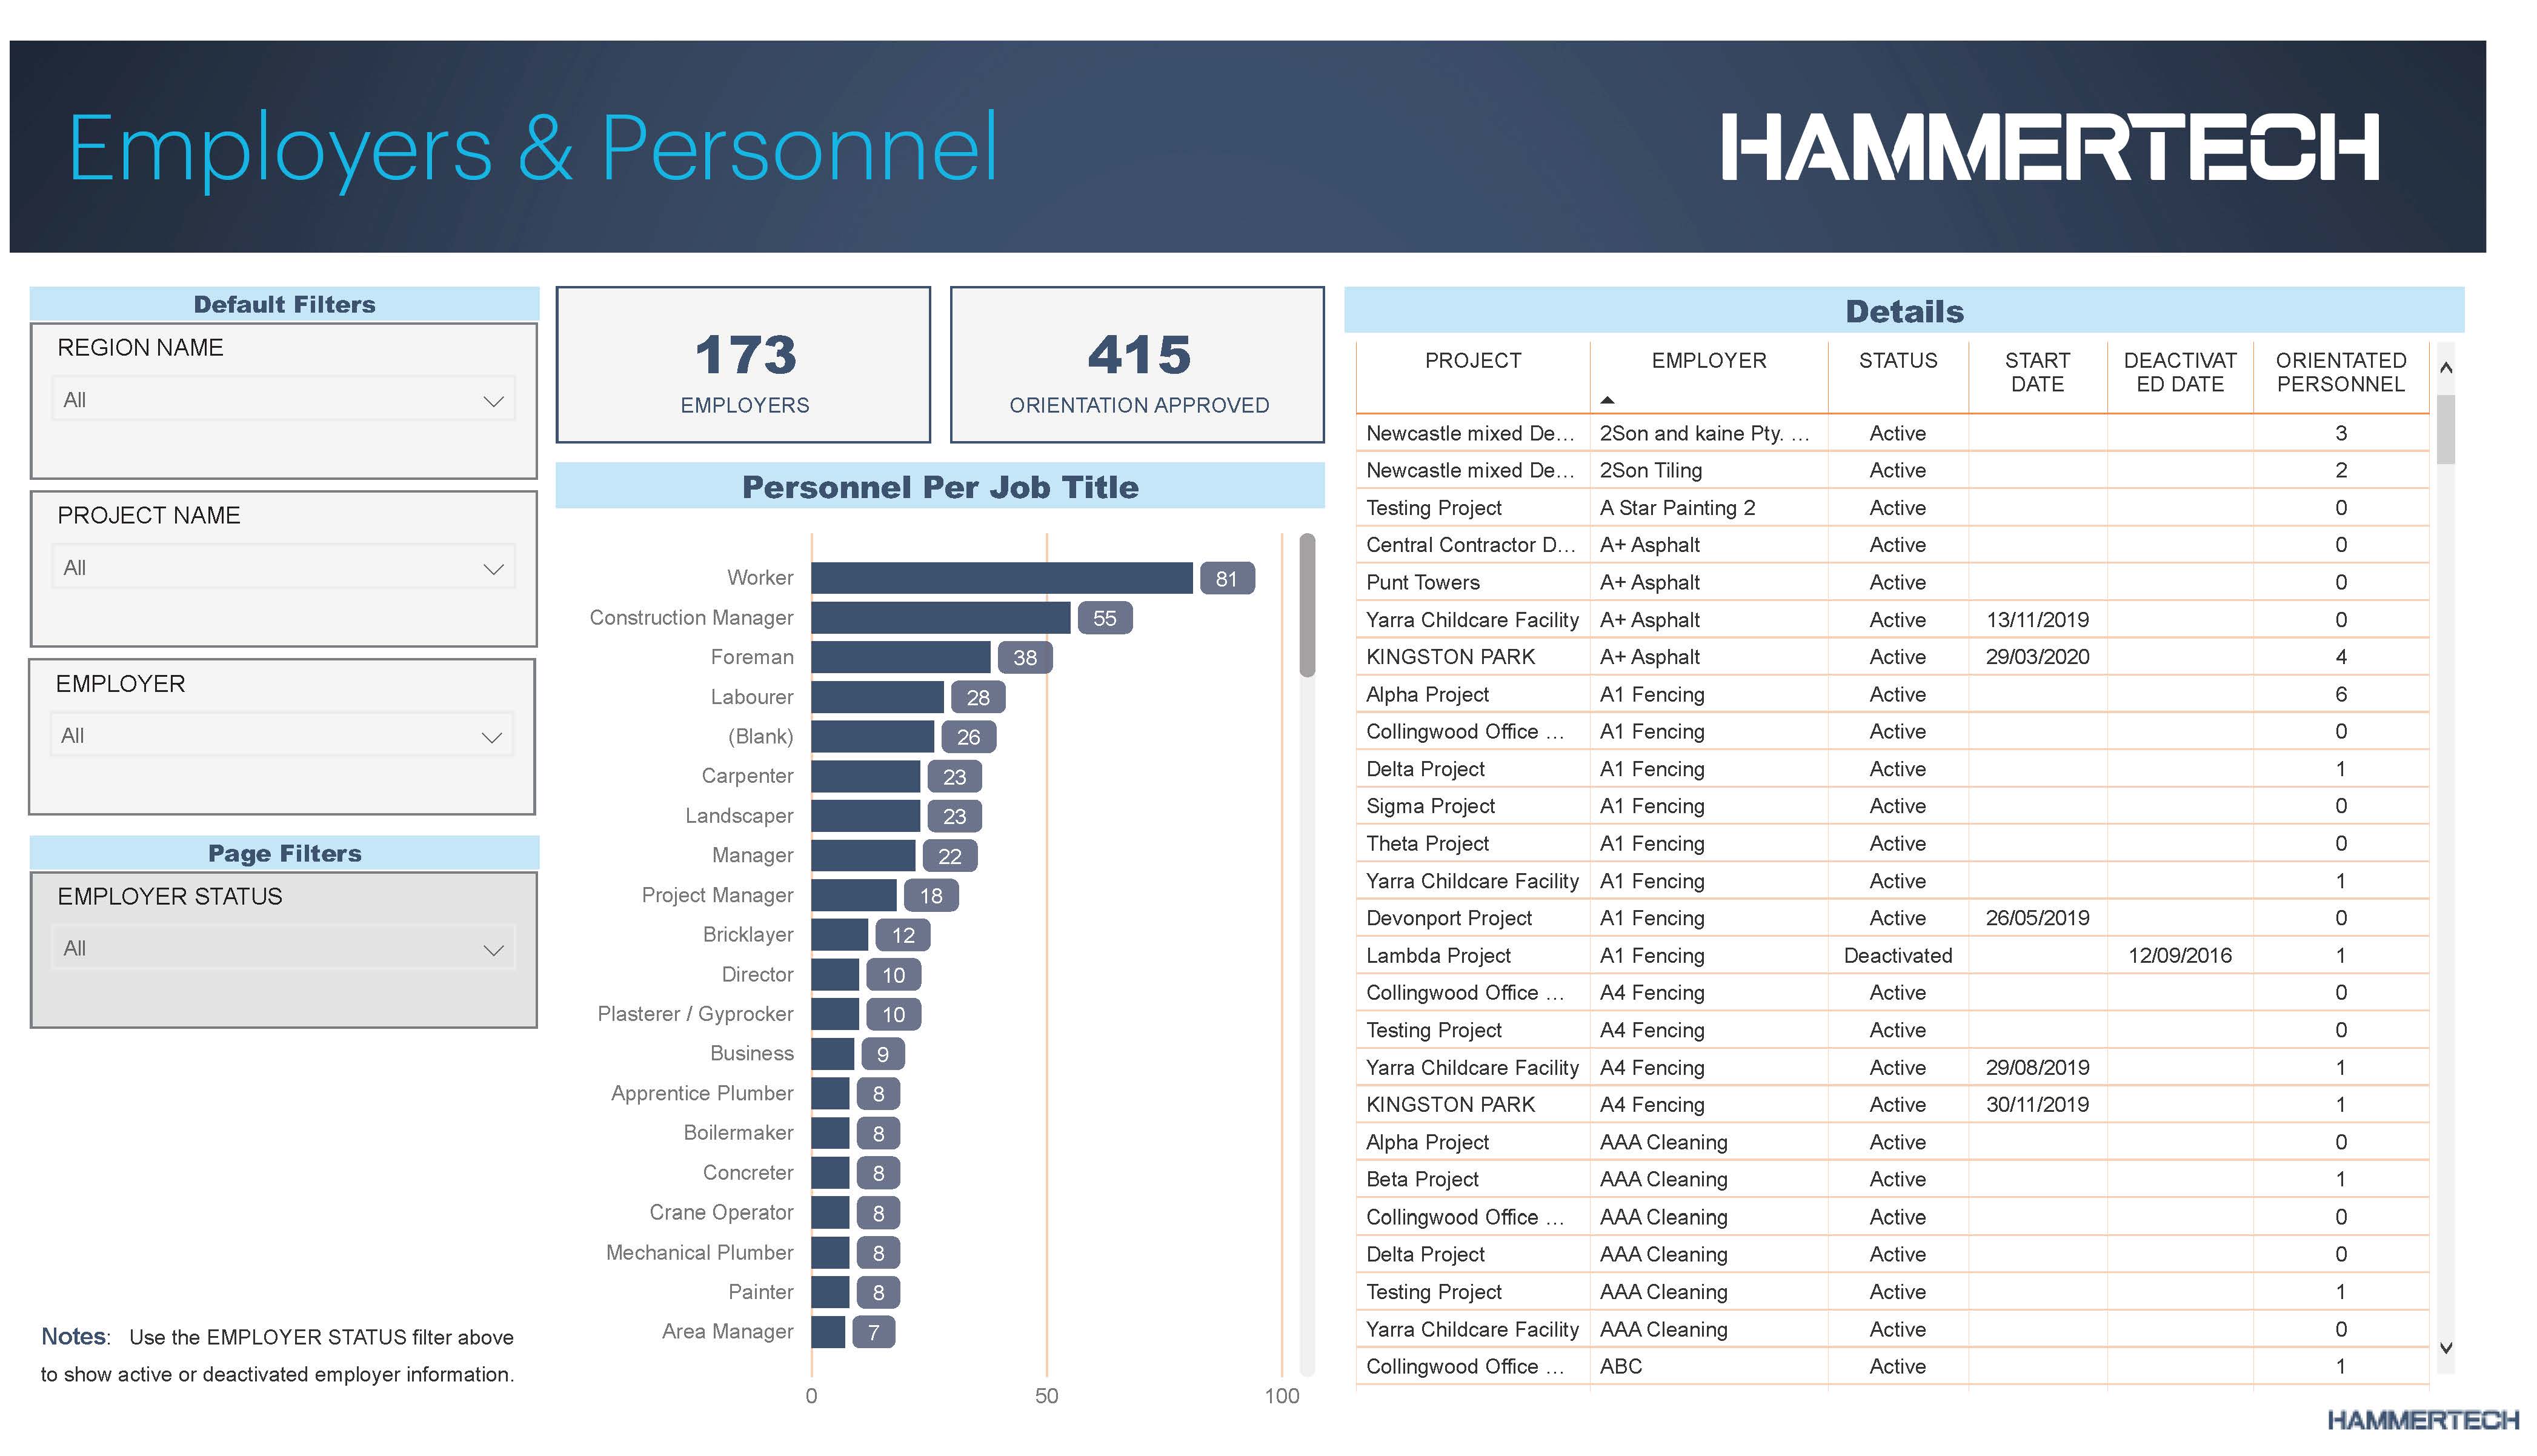 Construction workforce analytics: HammerTech's Power BI dashboard displaying customizable data visualizations of personnel per job title and employer - an innovative solution for tracking workforce performance, safety, and compliance in construction projects.